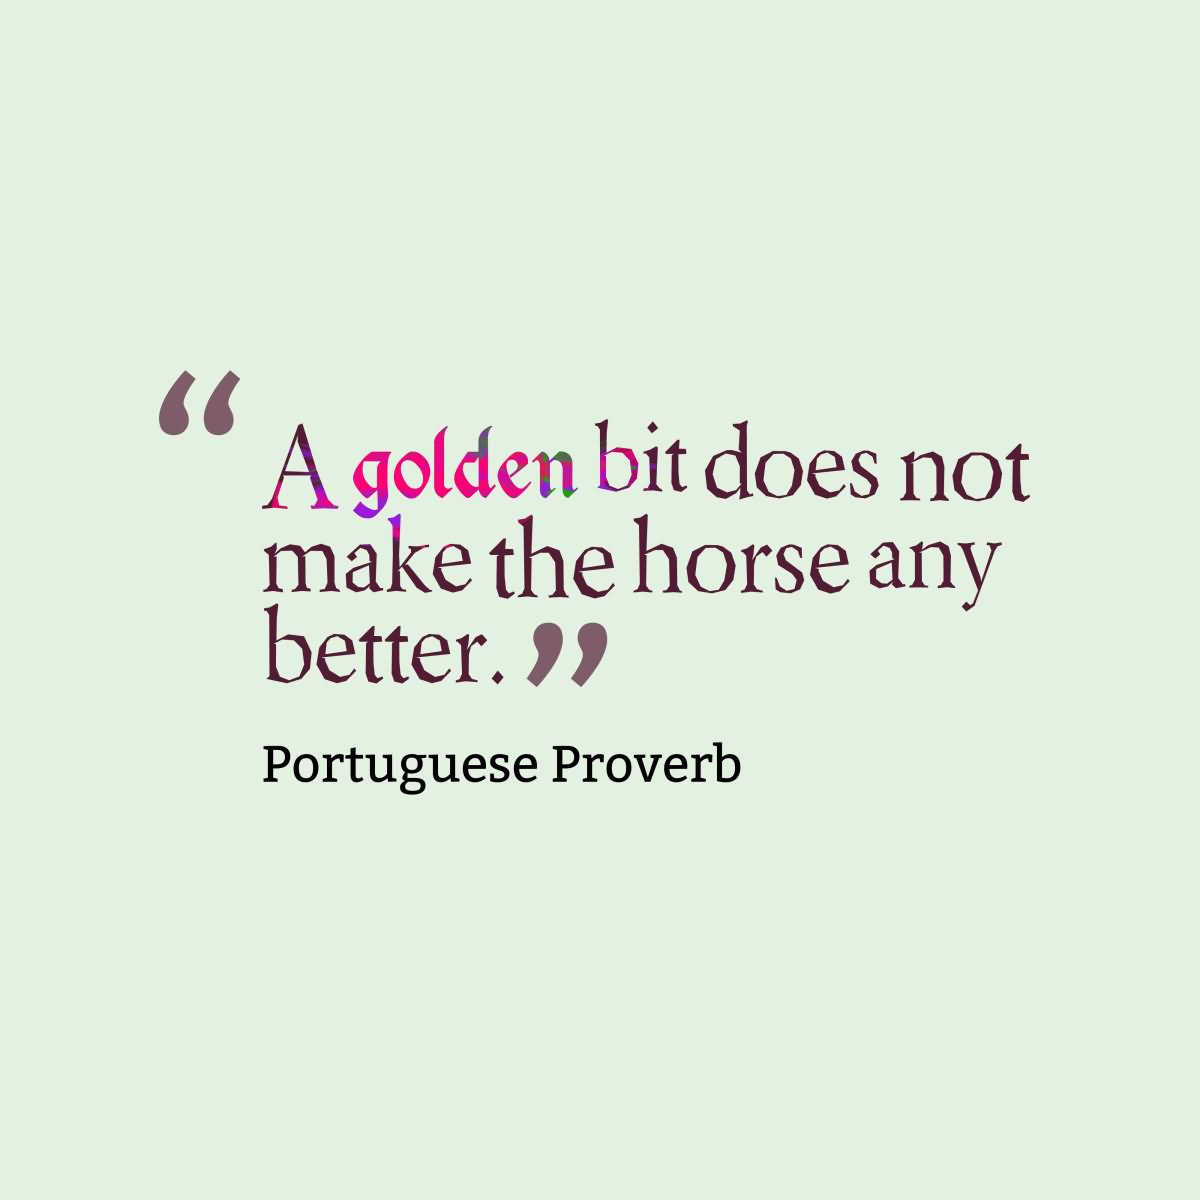 A golden bit does not make the horse any better